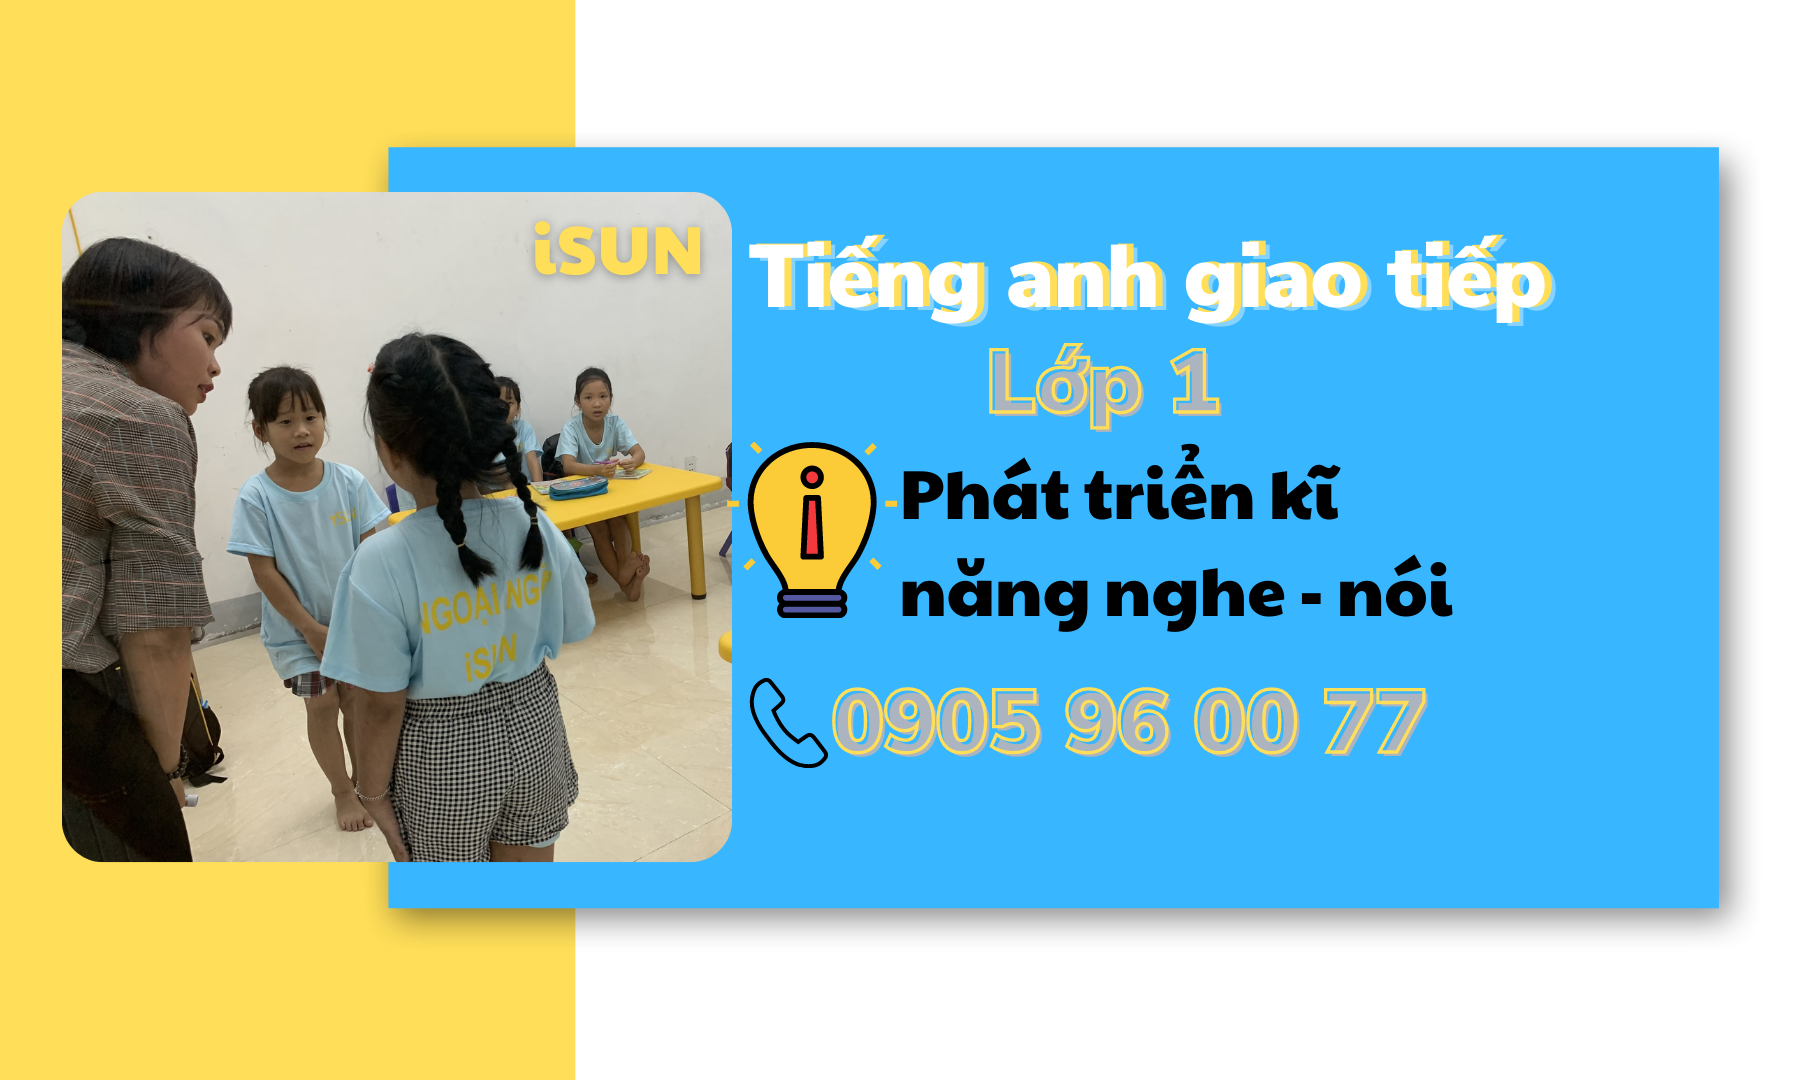 Tiếng anh giao tiếp lớp 1